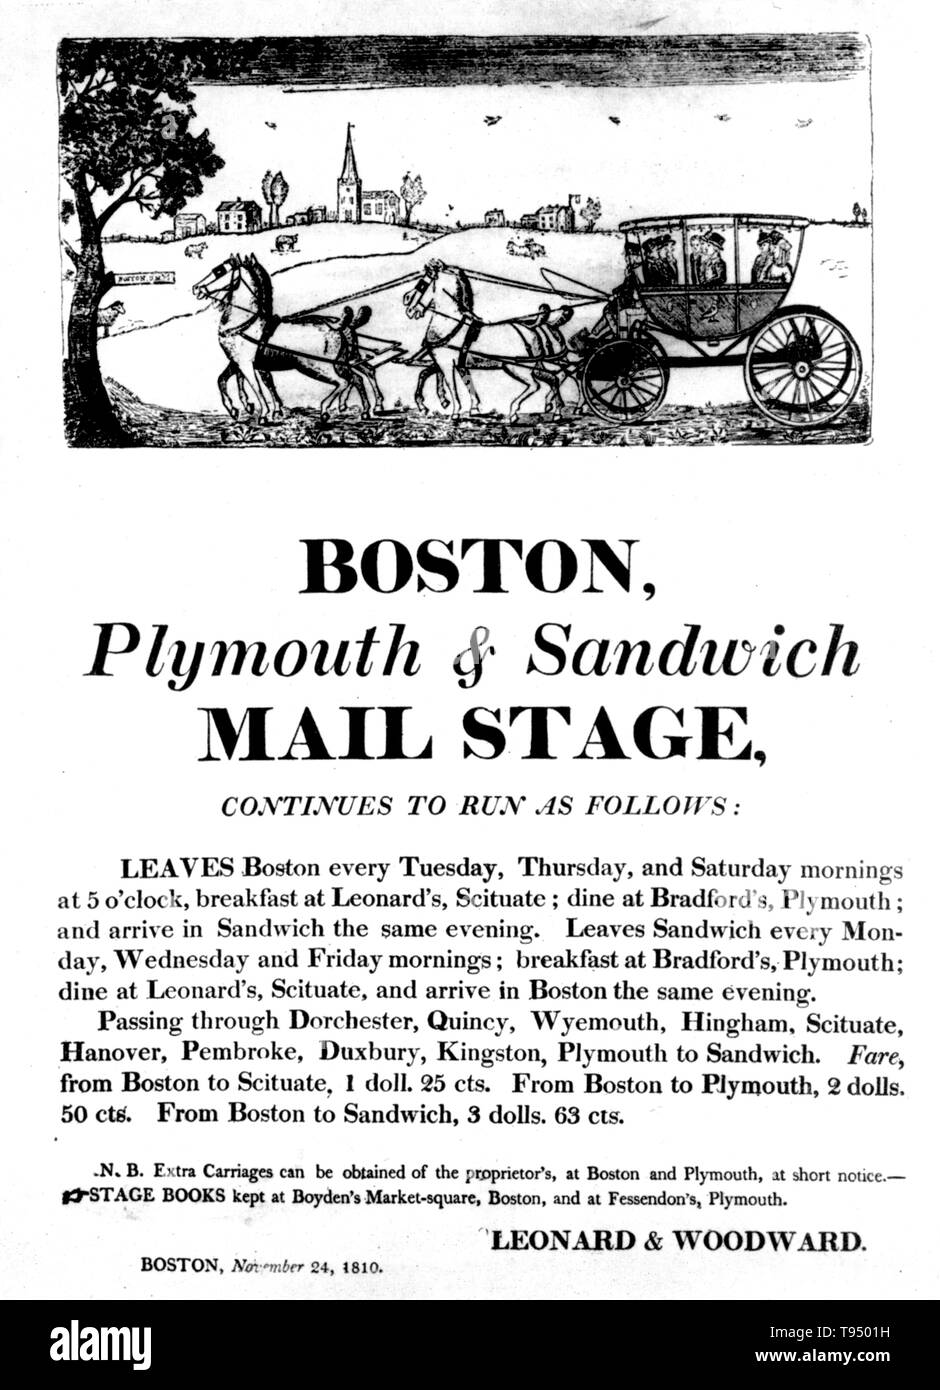 The first mail coaches appeared in the later 18th century carrying passengers and the mails, replacing the earlier post riders on the main roads. Coachmen carried letters, packages and money, often transacting business or delivering messages for their customers. By 1829 Boston was the hub of 77 stagecoach lines; by 1832 there were 106. The United States Mail traces its roots to 1775 during the Second Continental Congress, where Benjamin Franklin was appointed the first postmaster general. Stock Photo